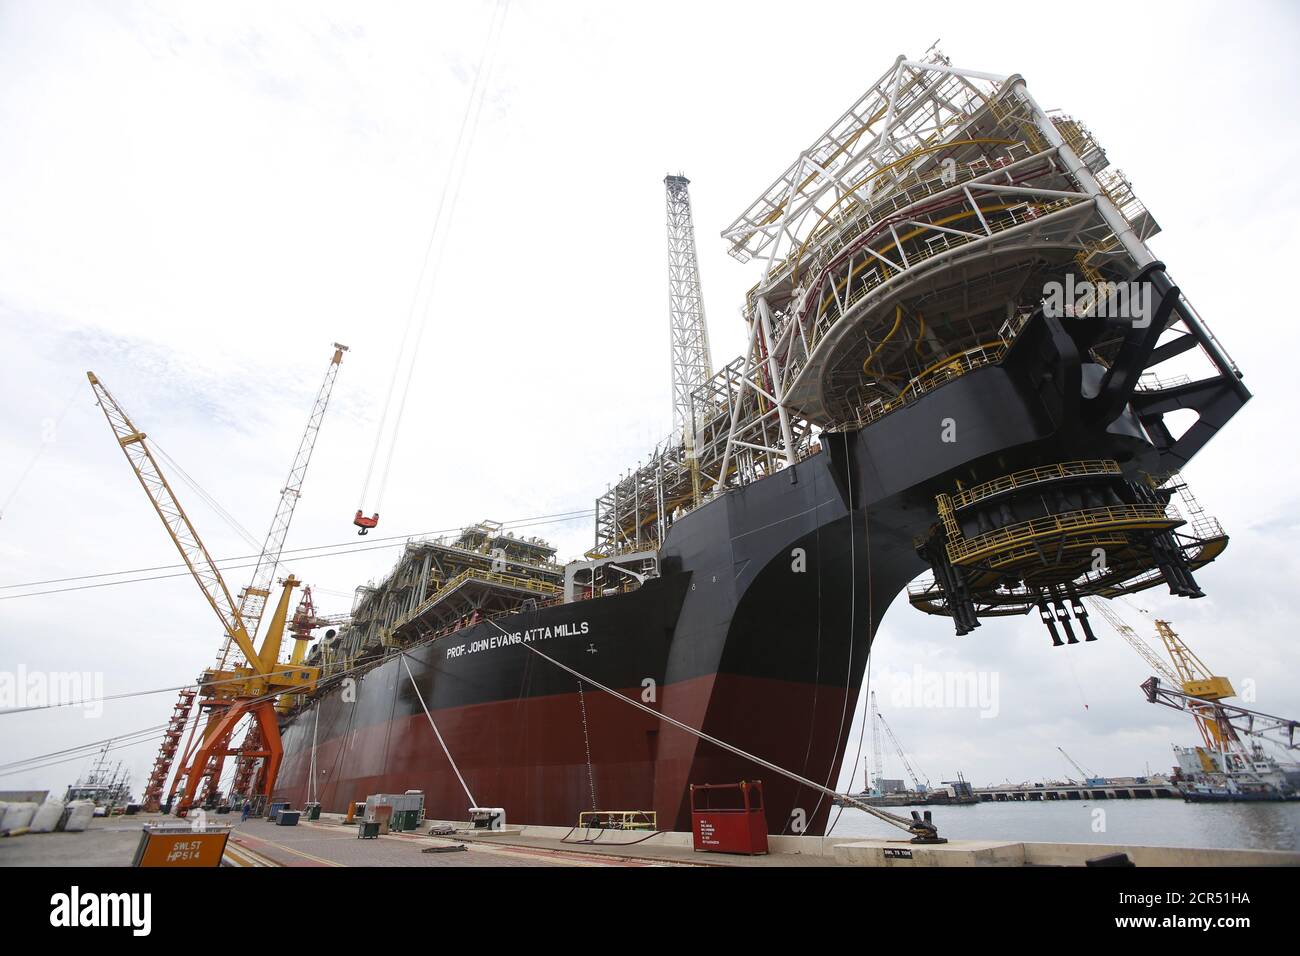 A view of Tullow Oil's Floating Production, Storage and Offloading vessel (FPSO) Prof. John Evans Atta Mills which was completed at Sembcorp Marine's Jurong Shipyard in Singapore January 20, 2016. Amid one of the deepest oil price crashes in history, Britain's Tullow Oil is sending one of the world's biggest floating deep-water oil production platforms to West Africa to pump crude for at least 20 years. Picture taken January 20, 2016.   REUTERS/Edgar Su Stock Photo